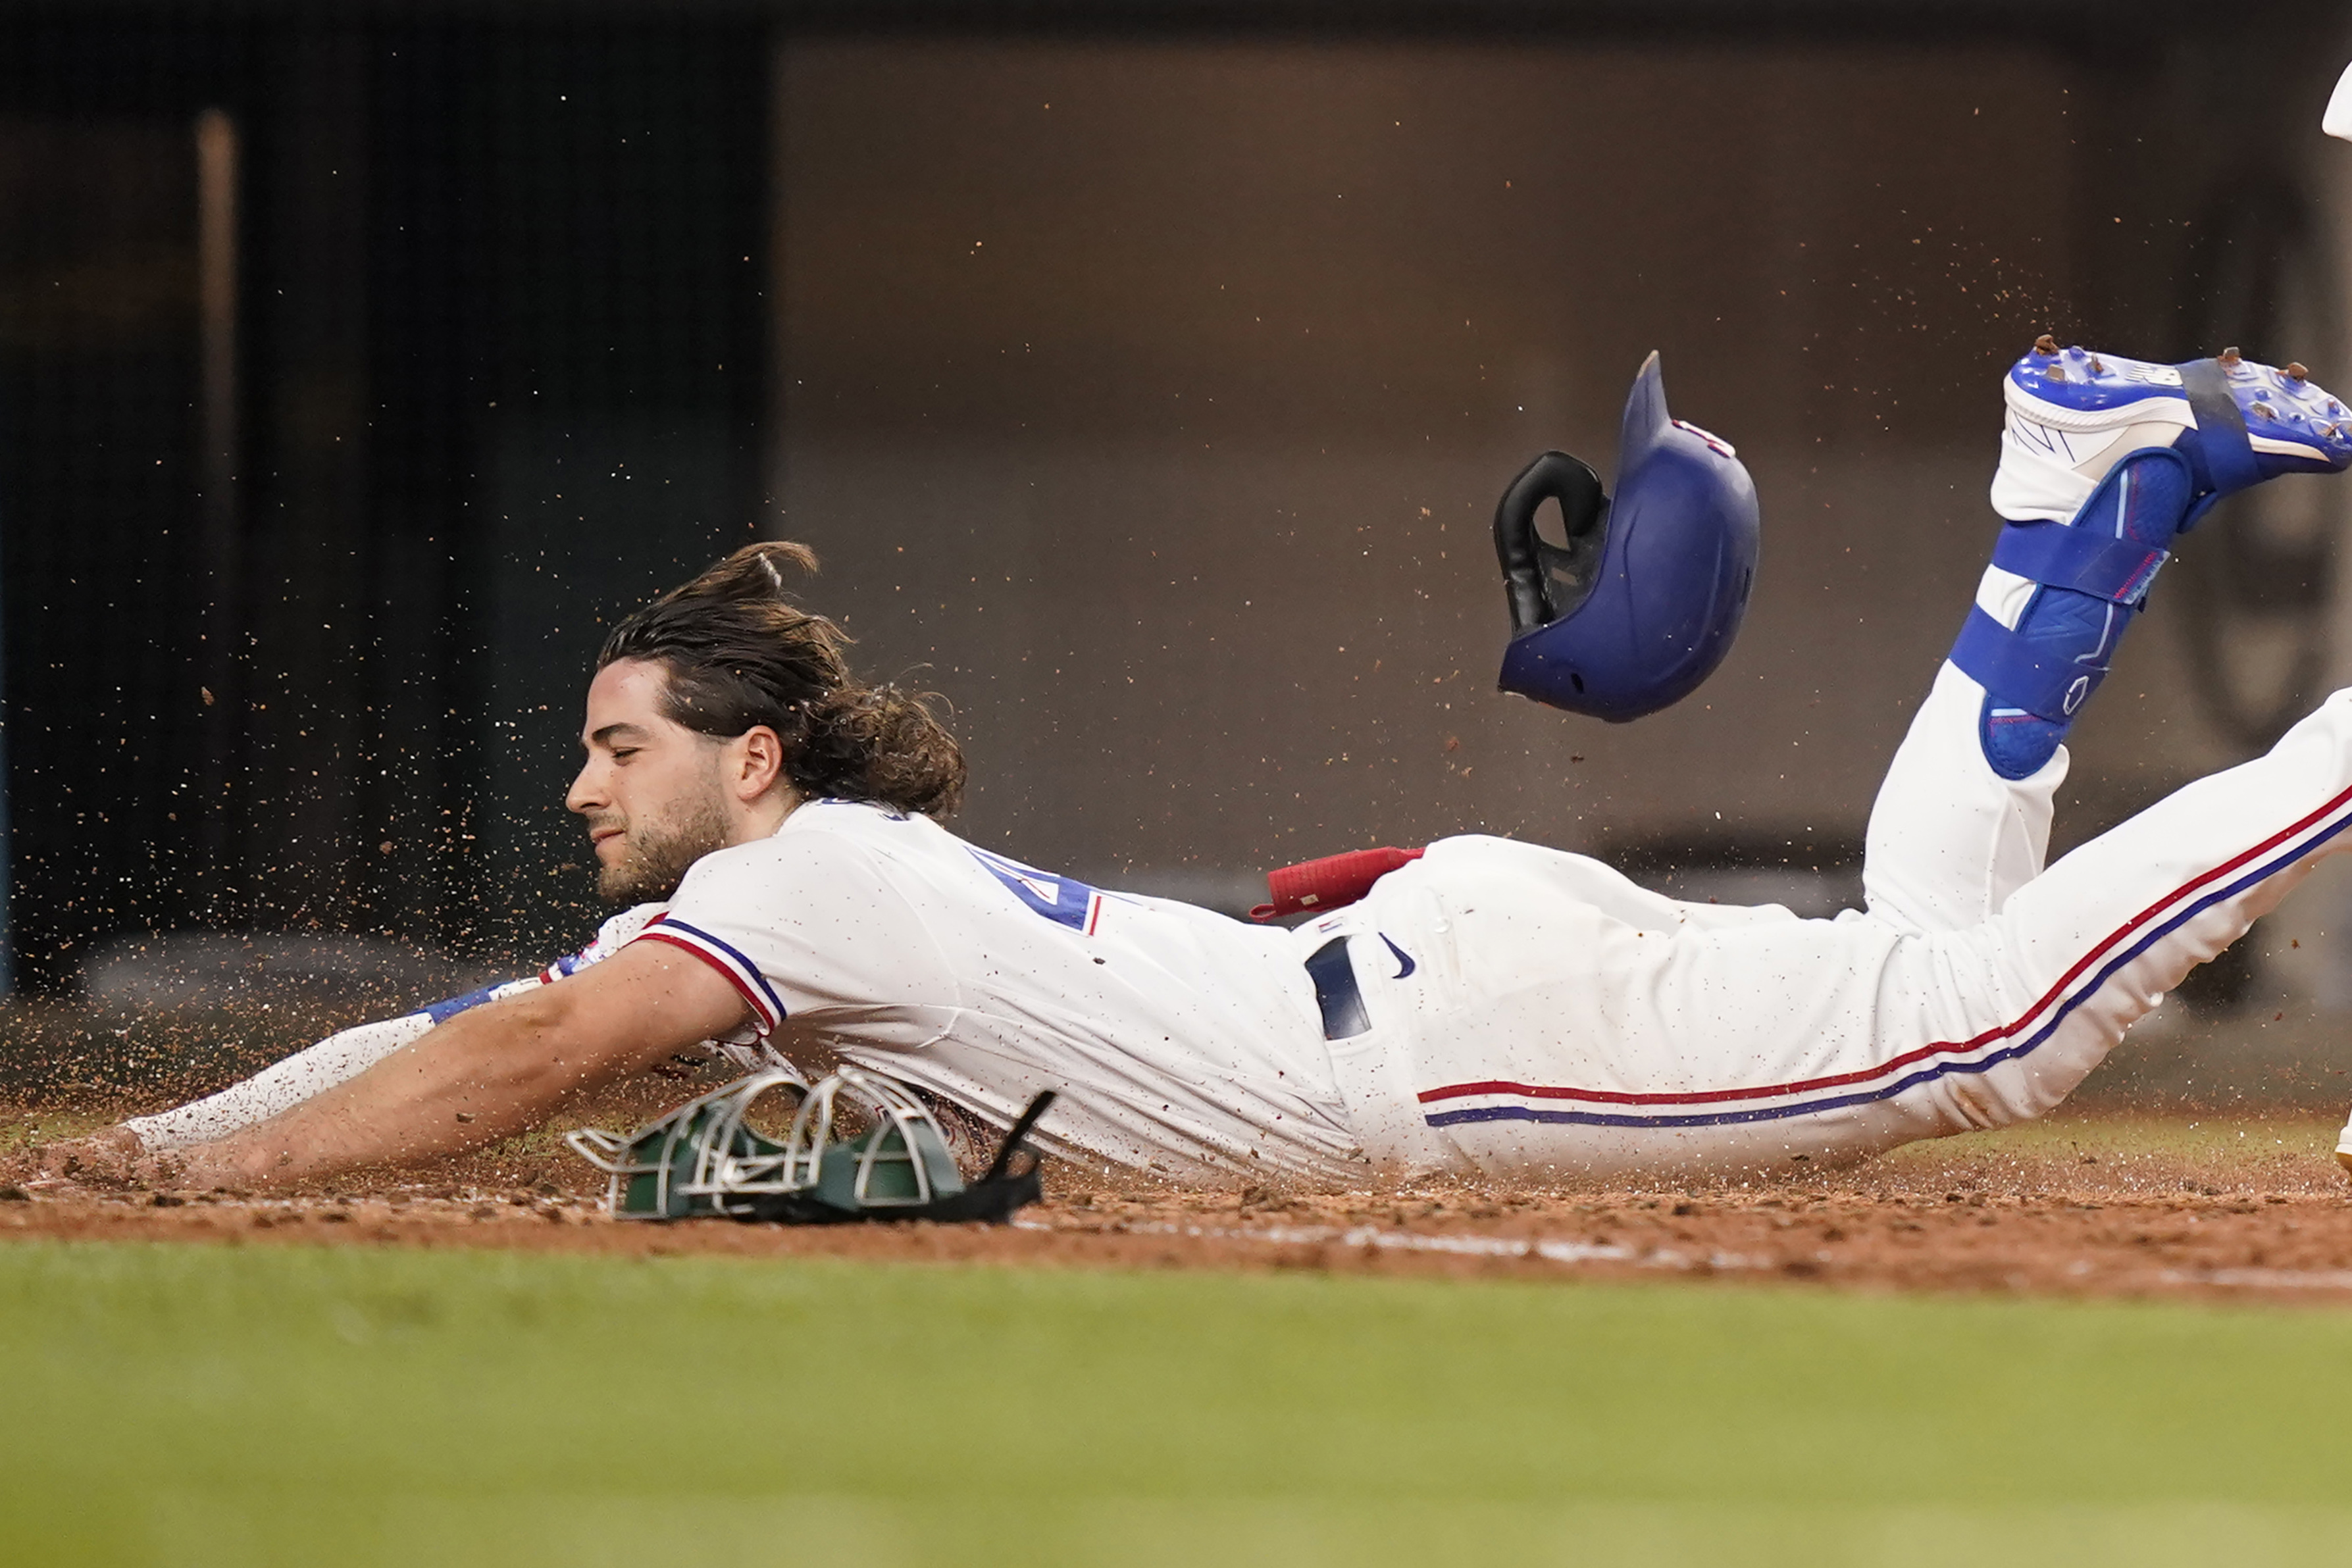 Rangers' Josh Smith got stitches, some swelling after pitch to face